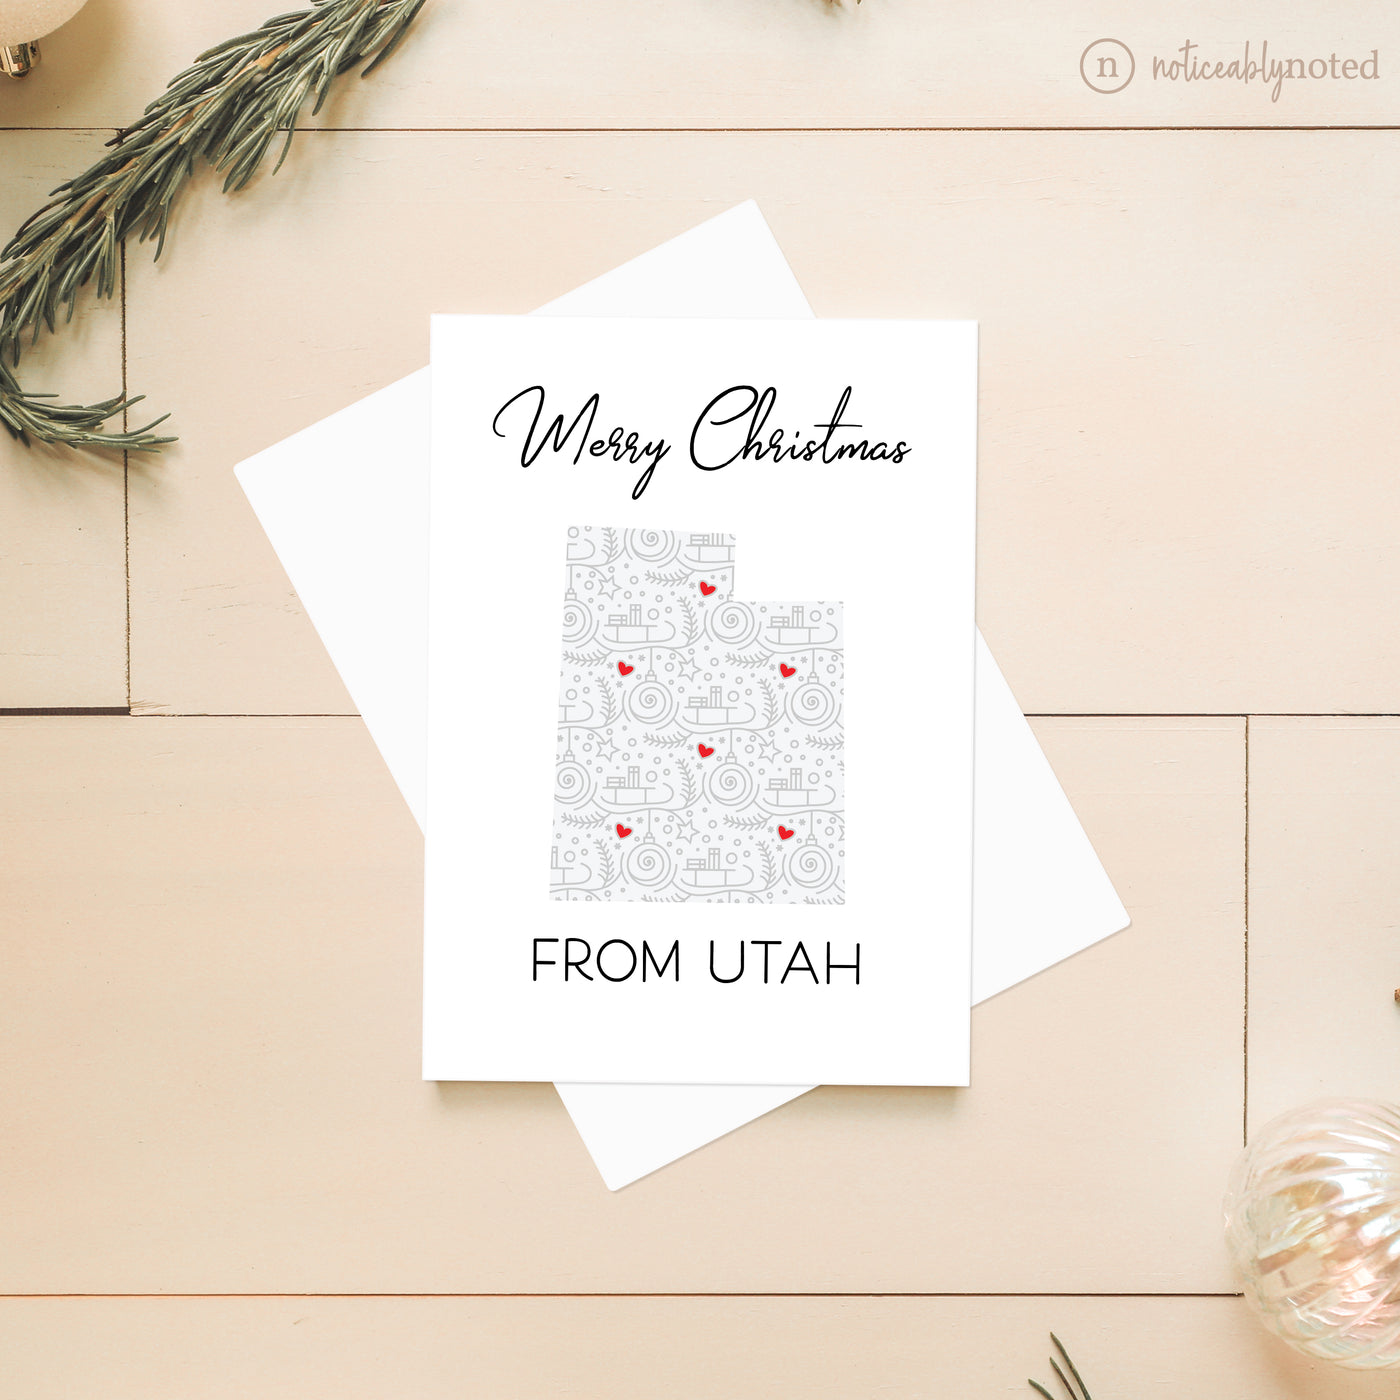 Utah Christmas Card - Merry Christmas | Noticeably Noted